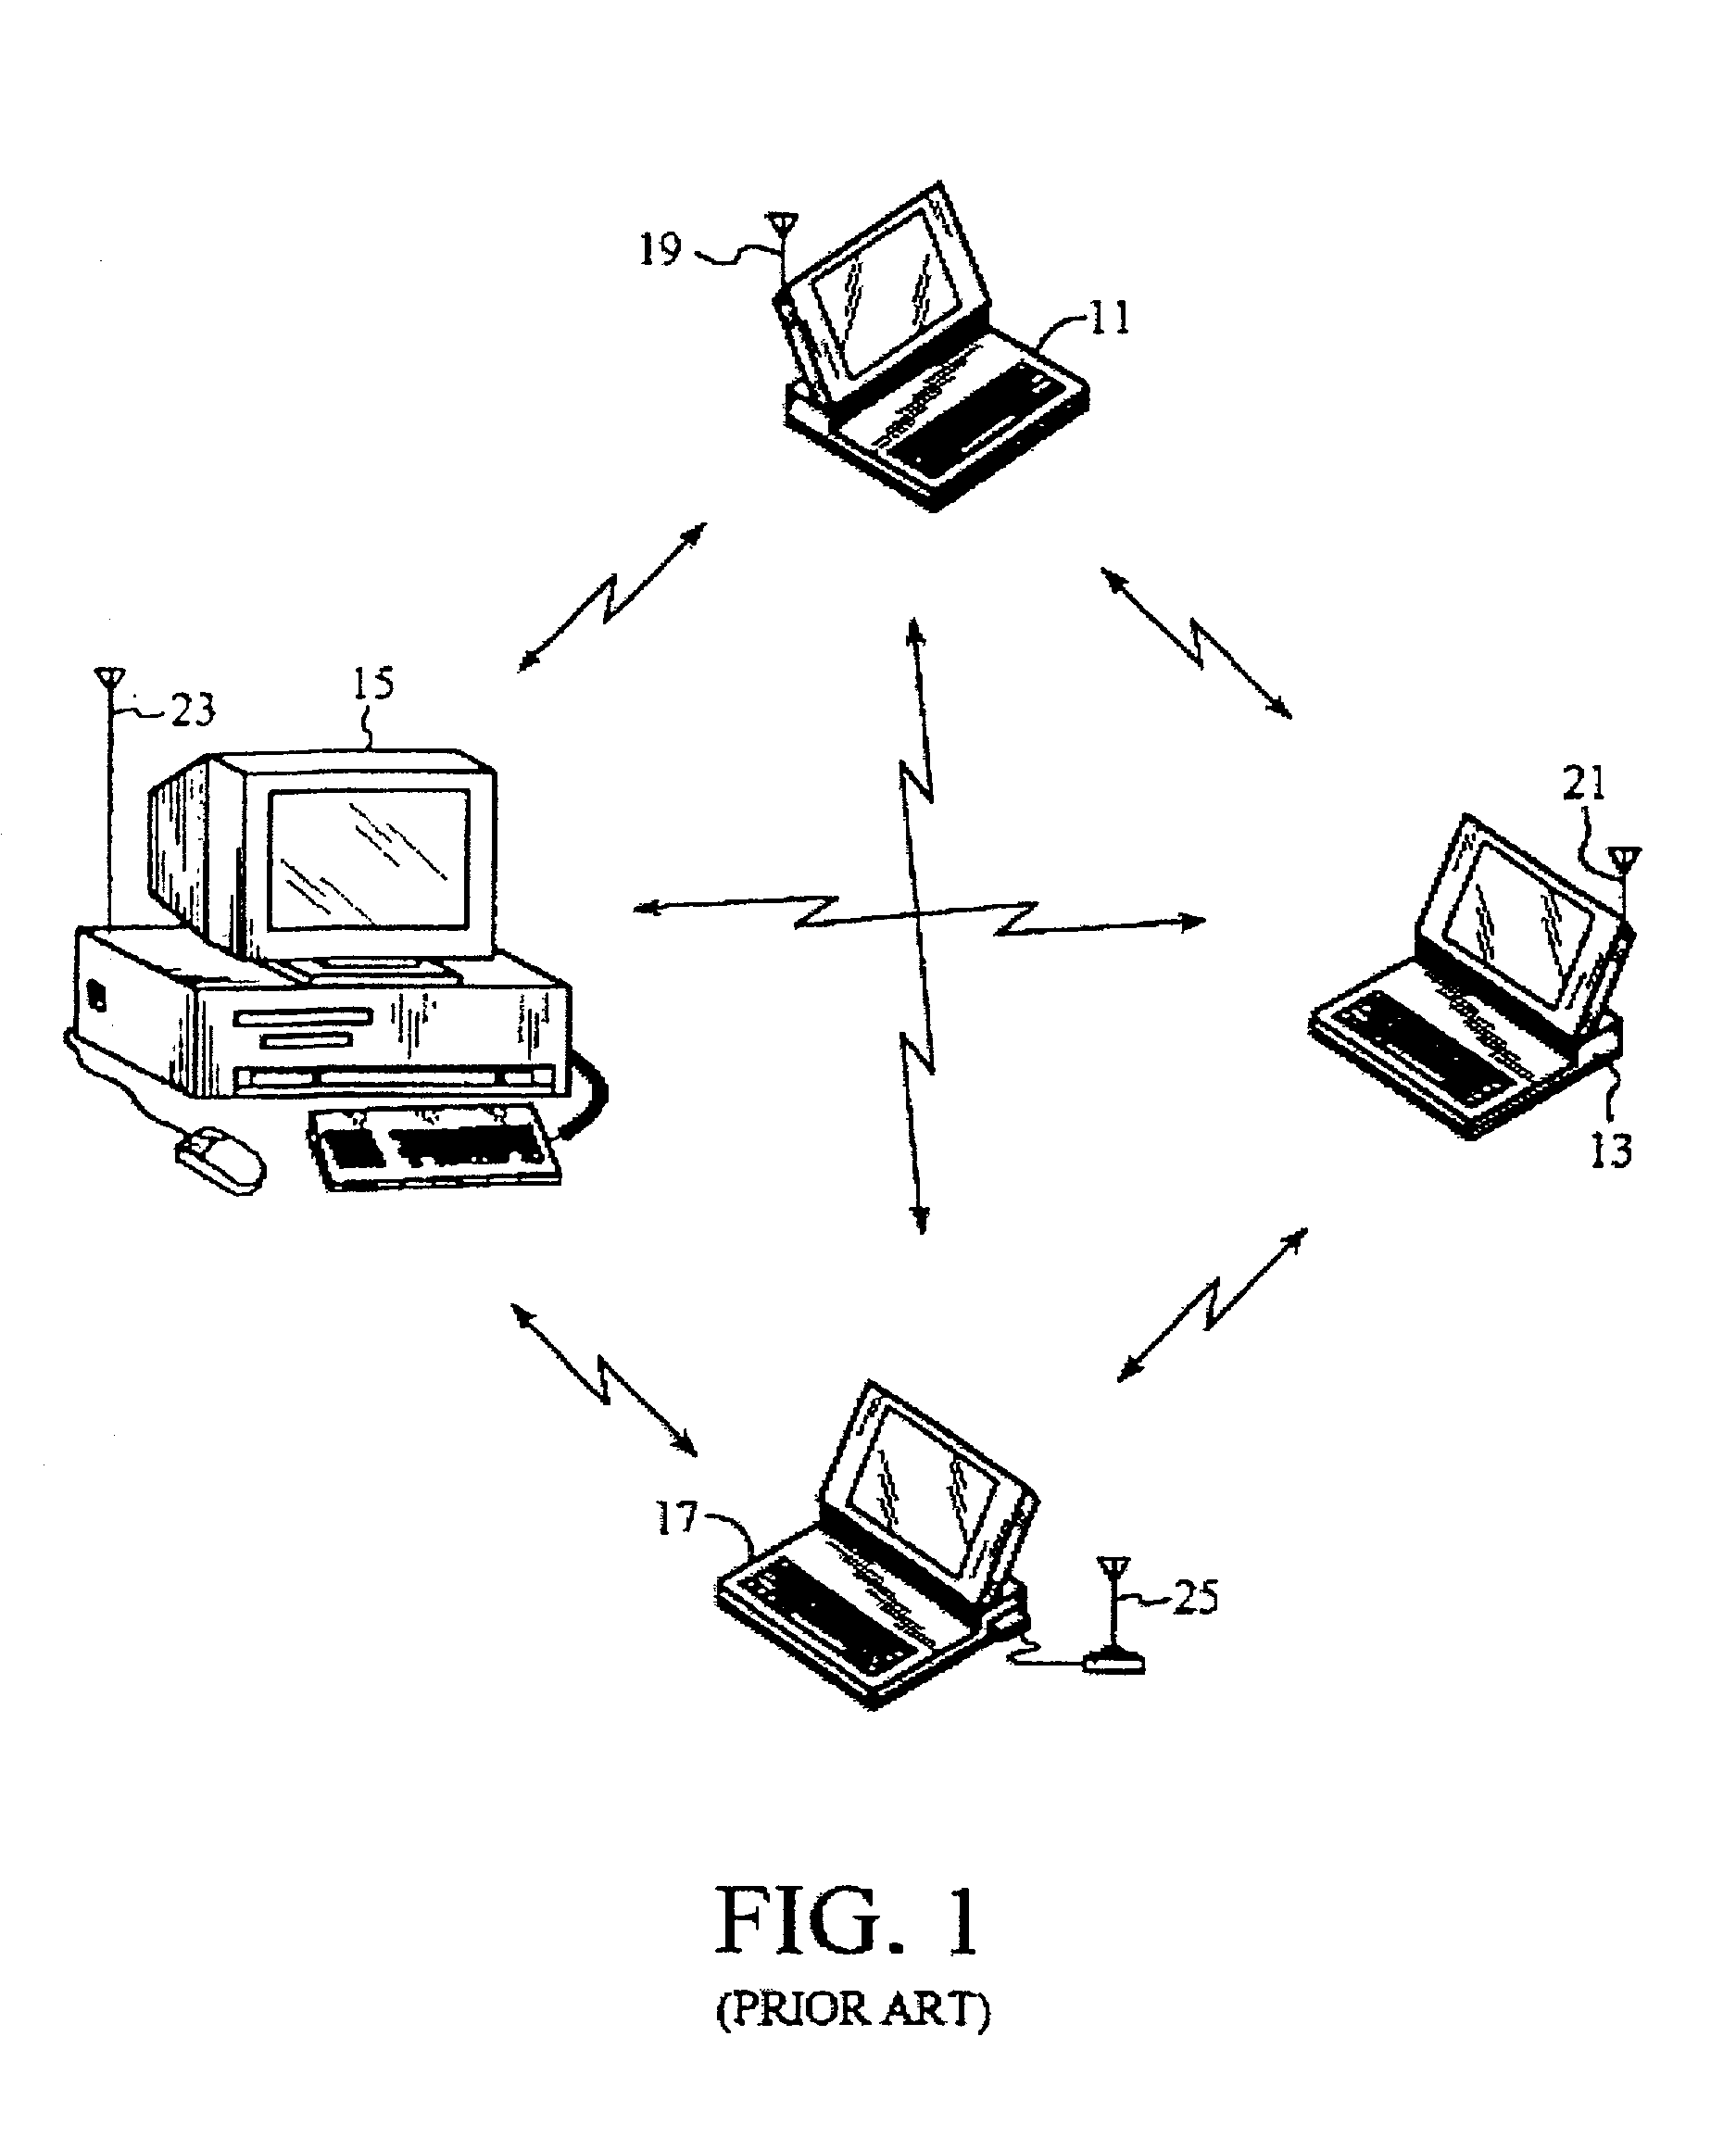 Method and system for simulating multiple independent client devices in a wired or wireless network